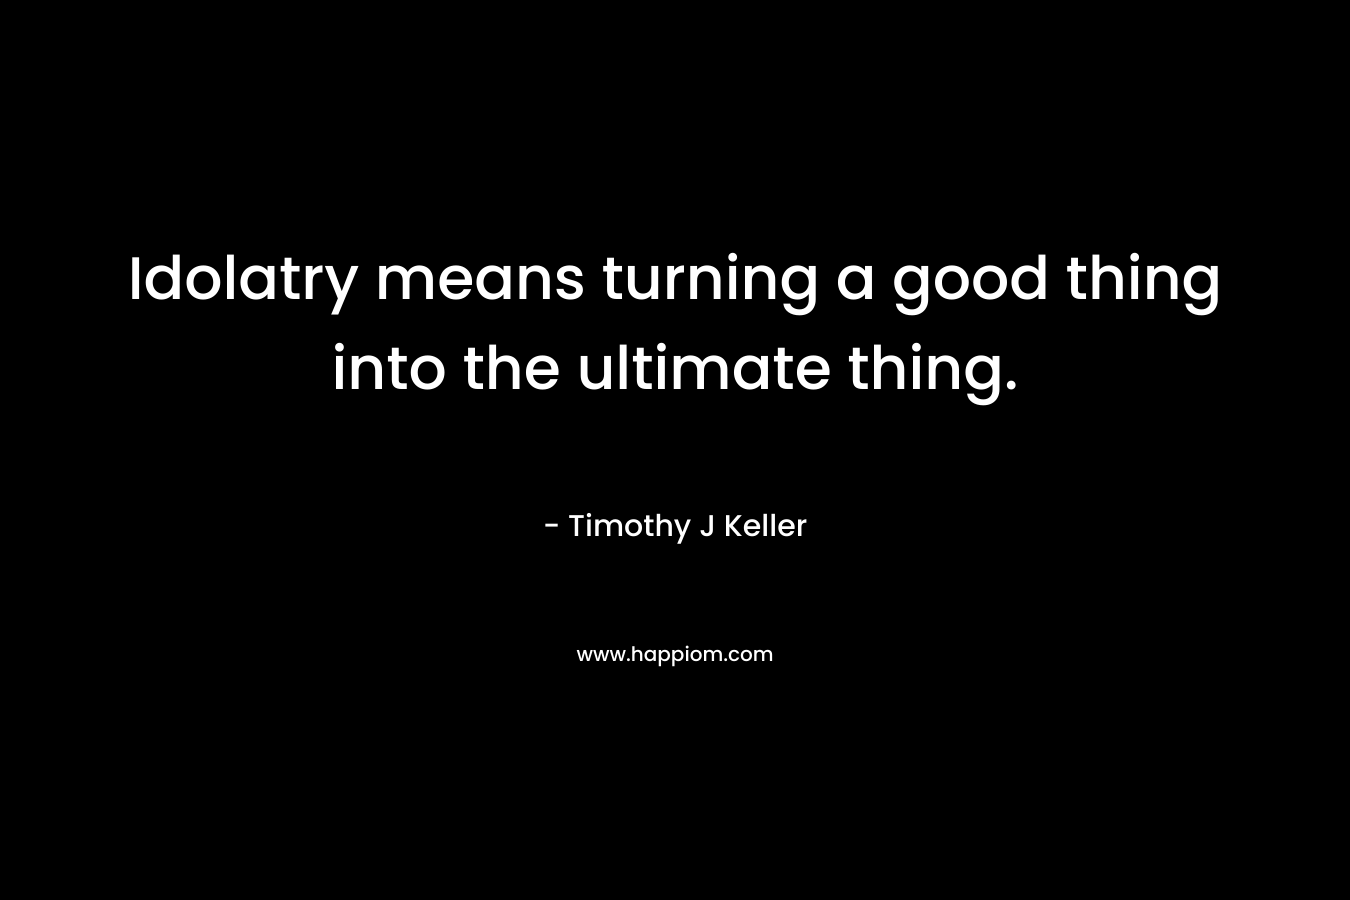 Idolatry means turning a good thing into the ultimate thing. – Timothy J Keller